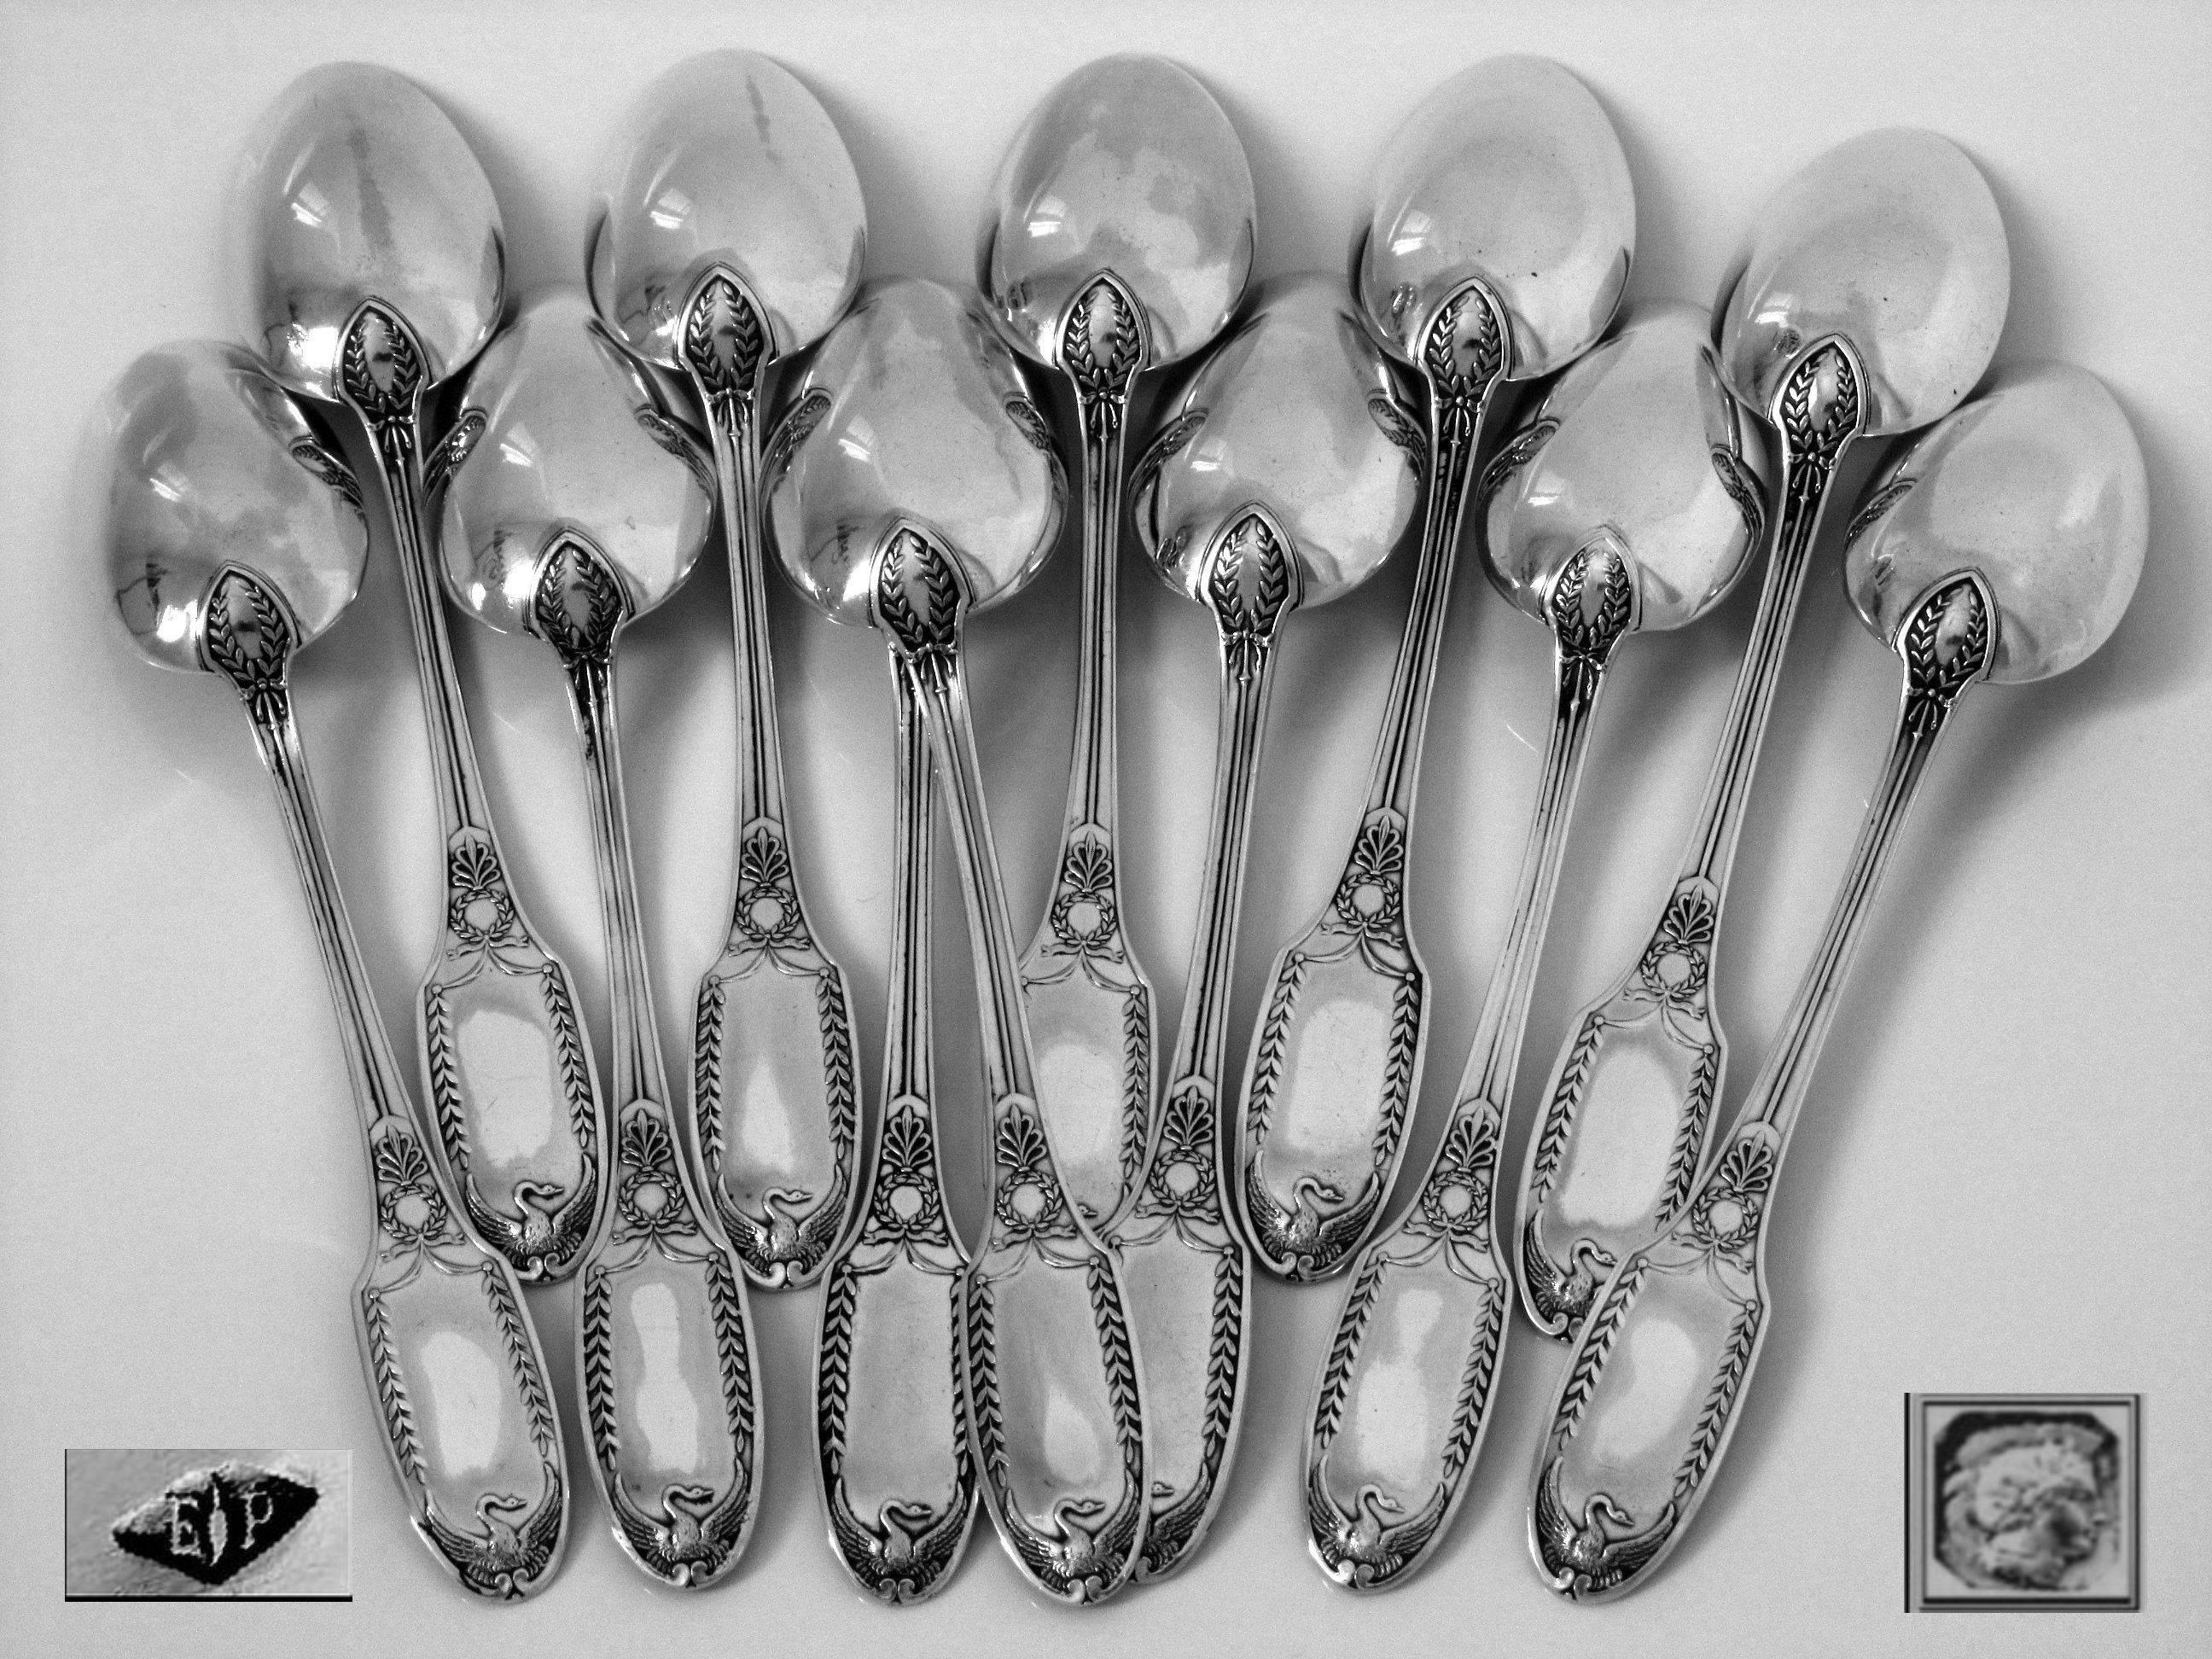 Empire Puiforcat Rare French Sterling Silver Tea or Coffee Spoons Set 12 pc box Swans